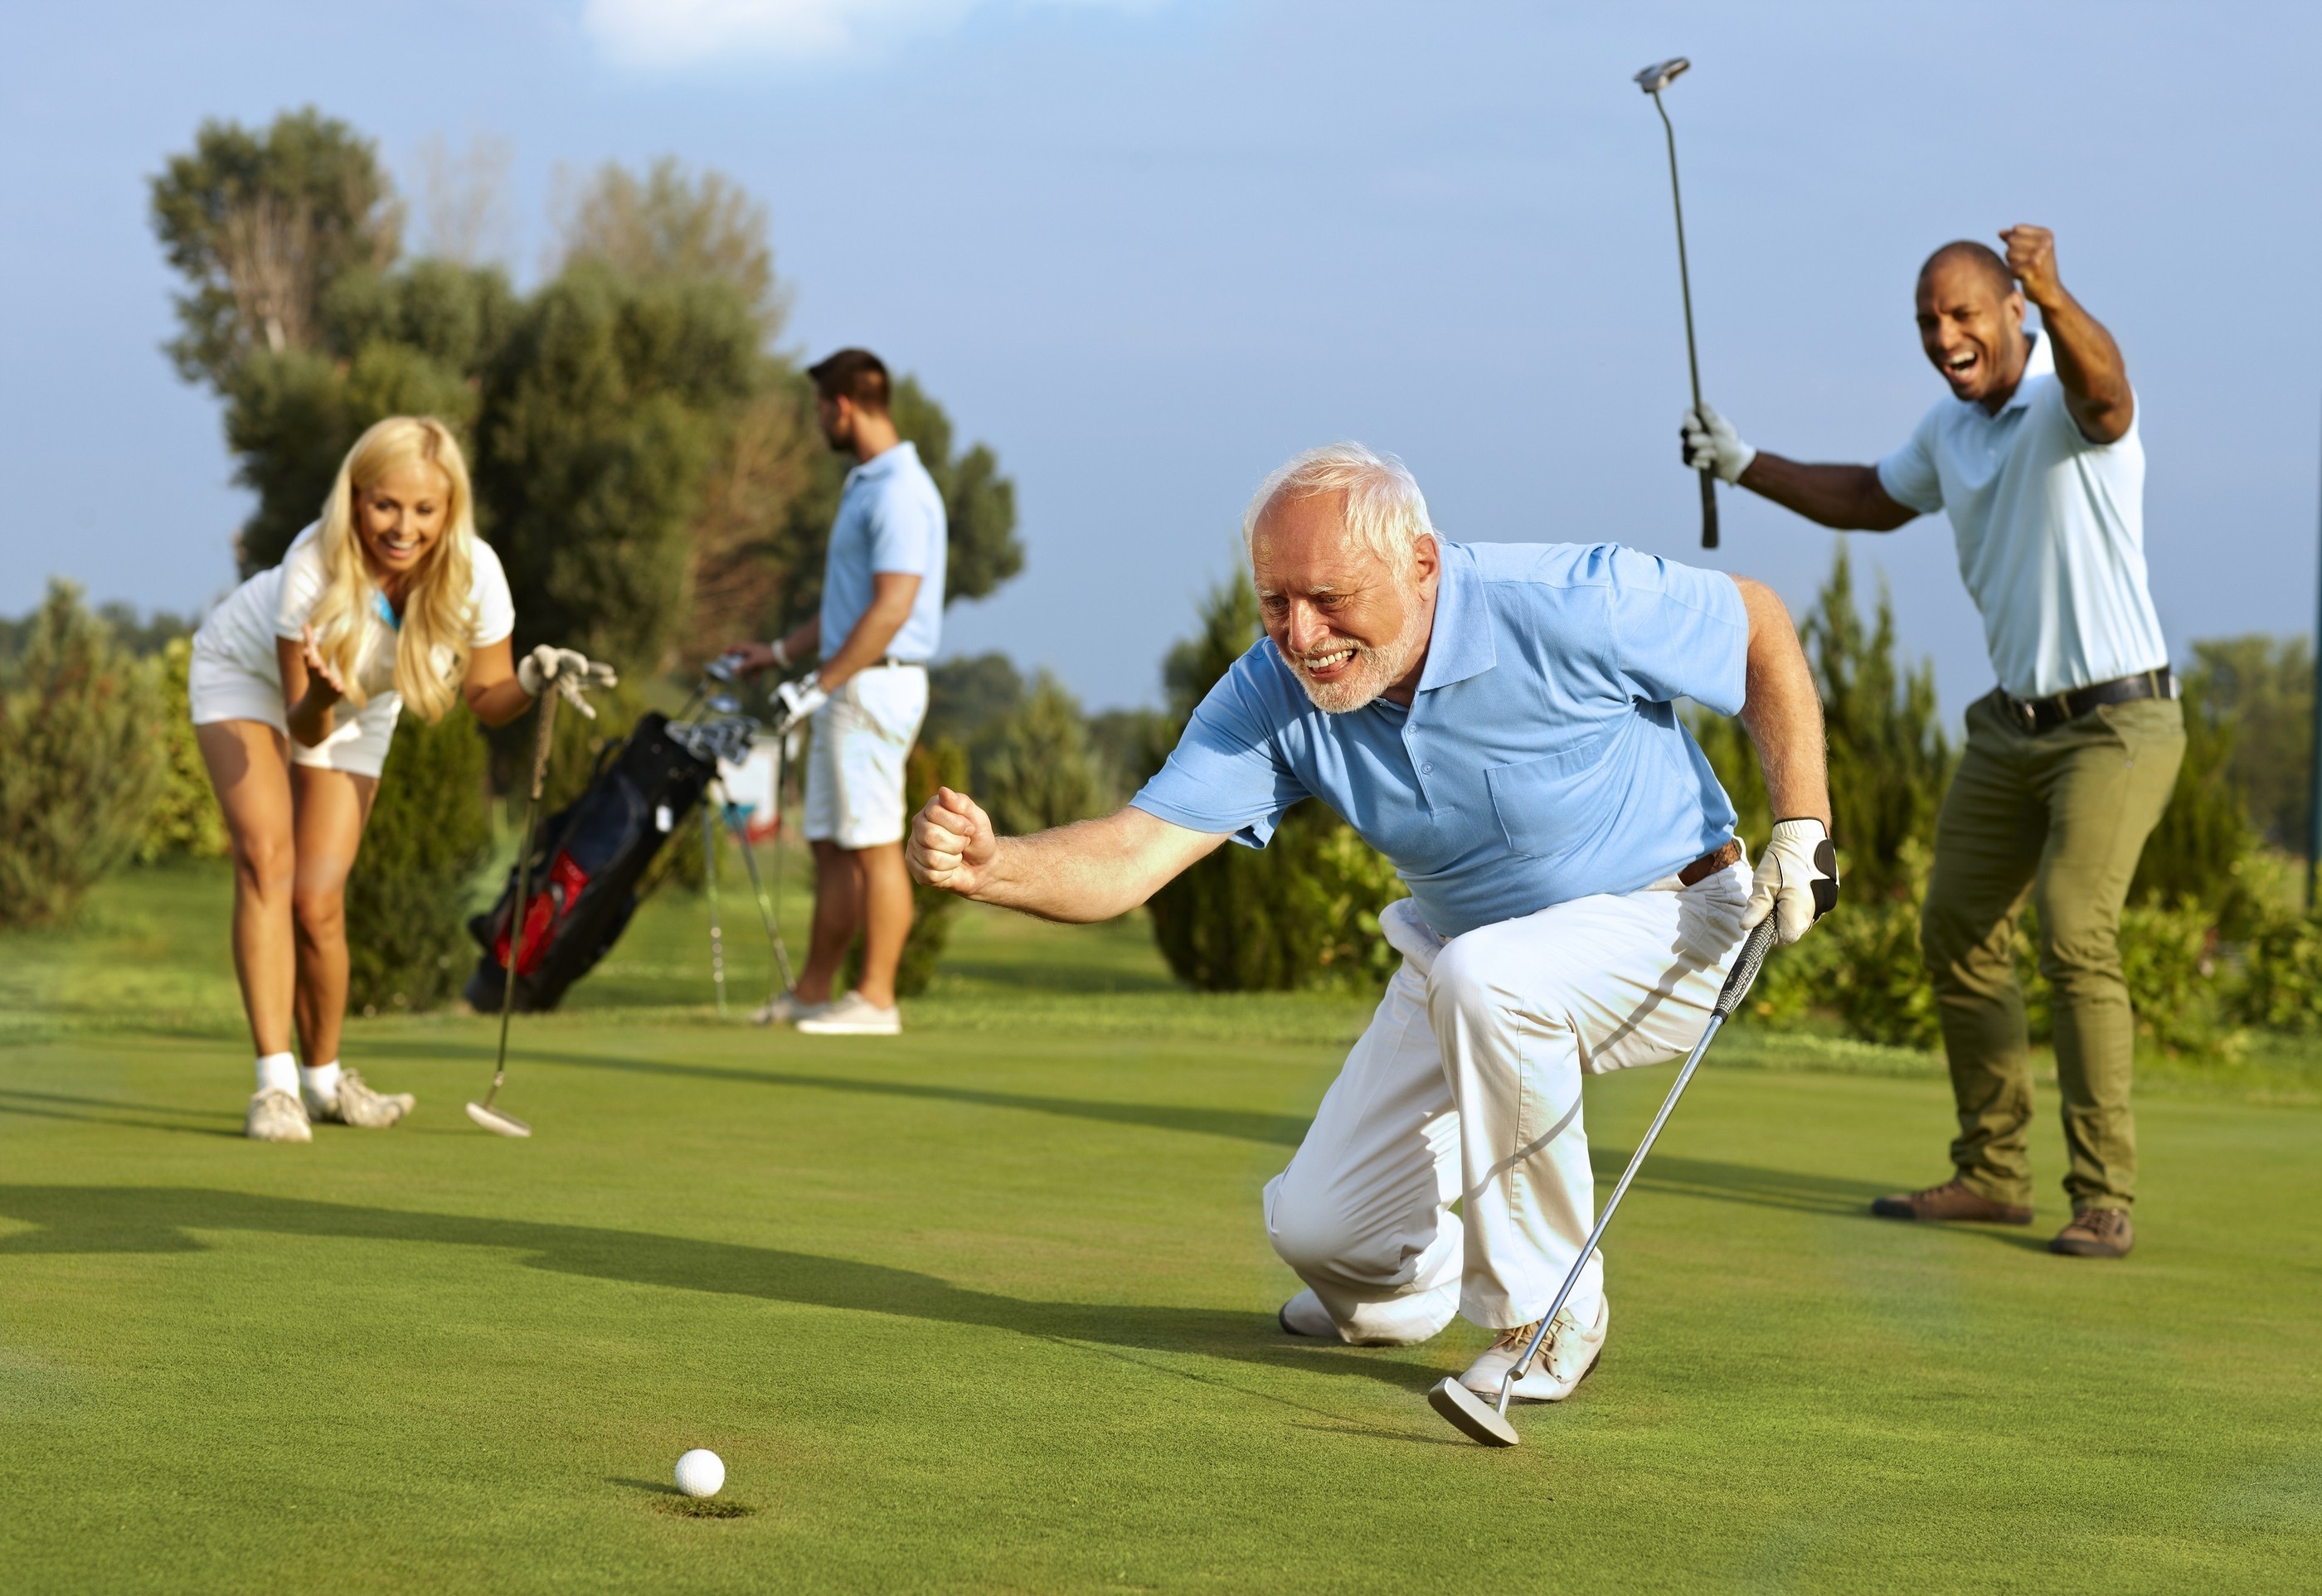 Benefits Of Golf On Your Mental Health And Well Being DH Fitness Center